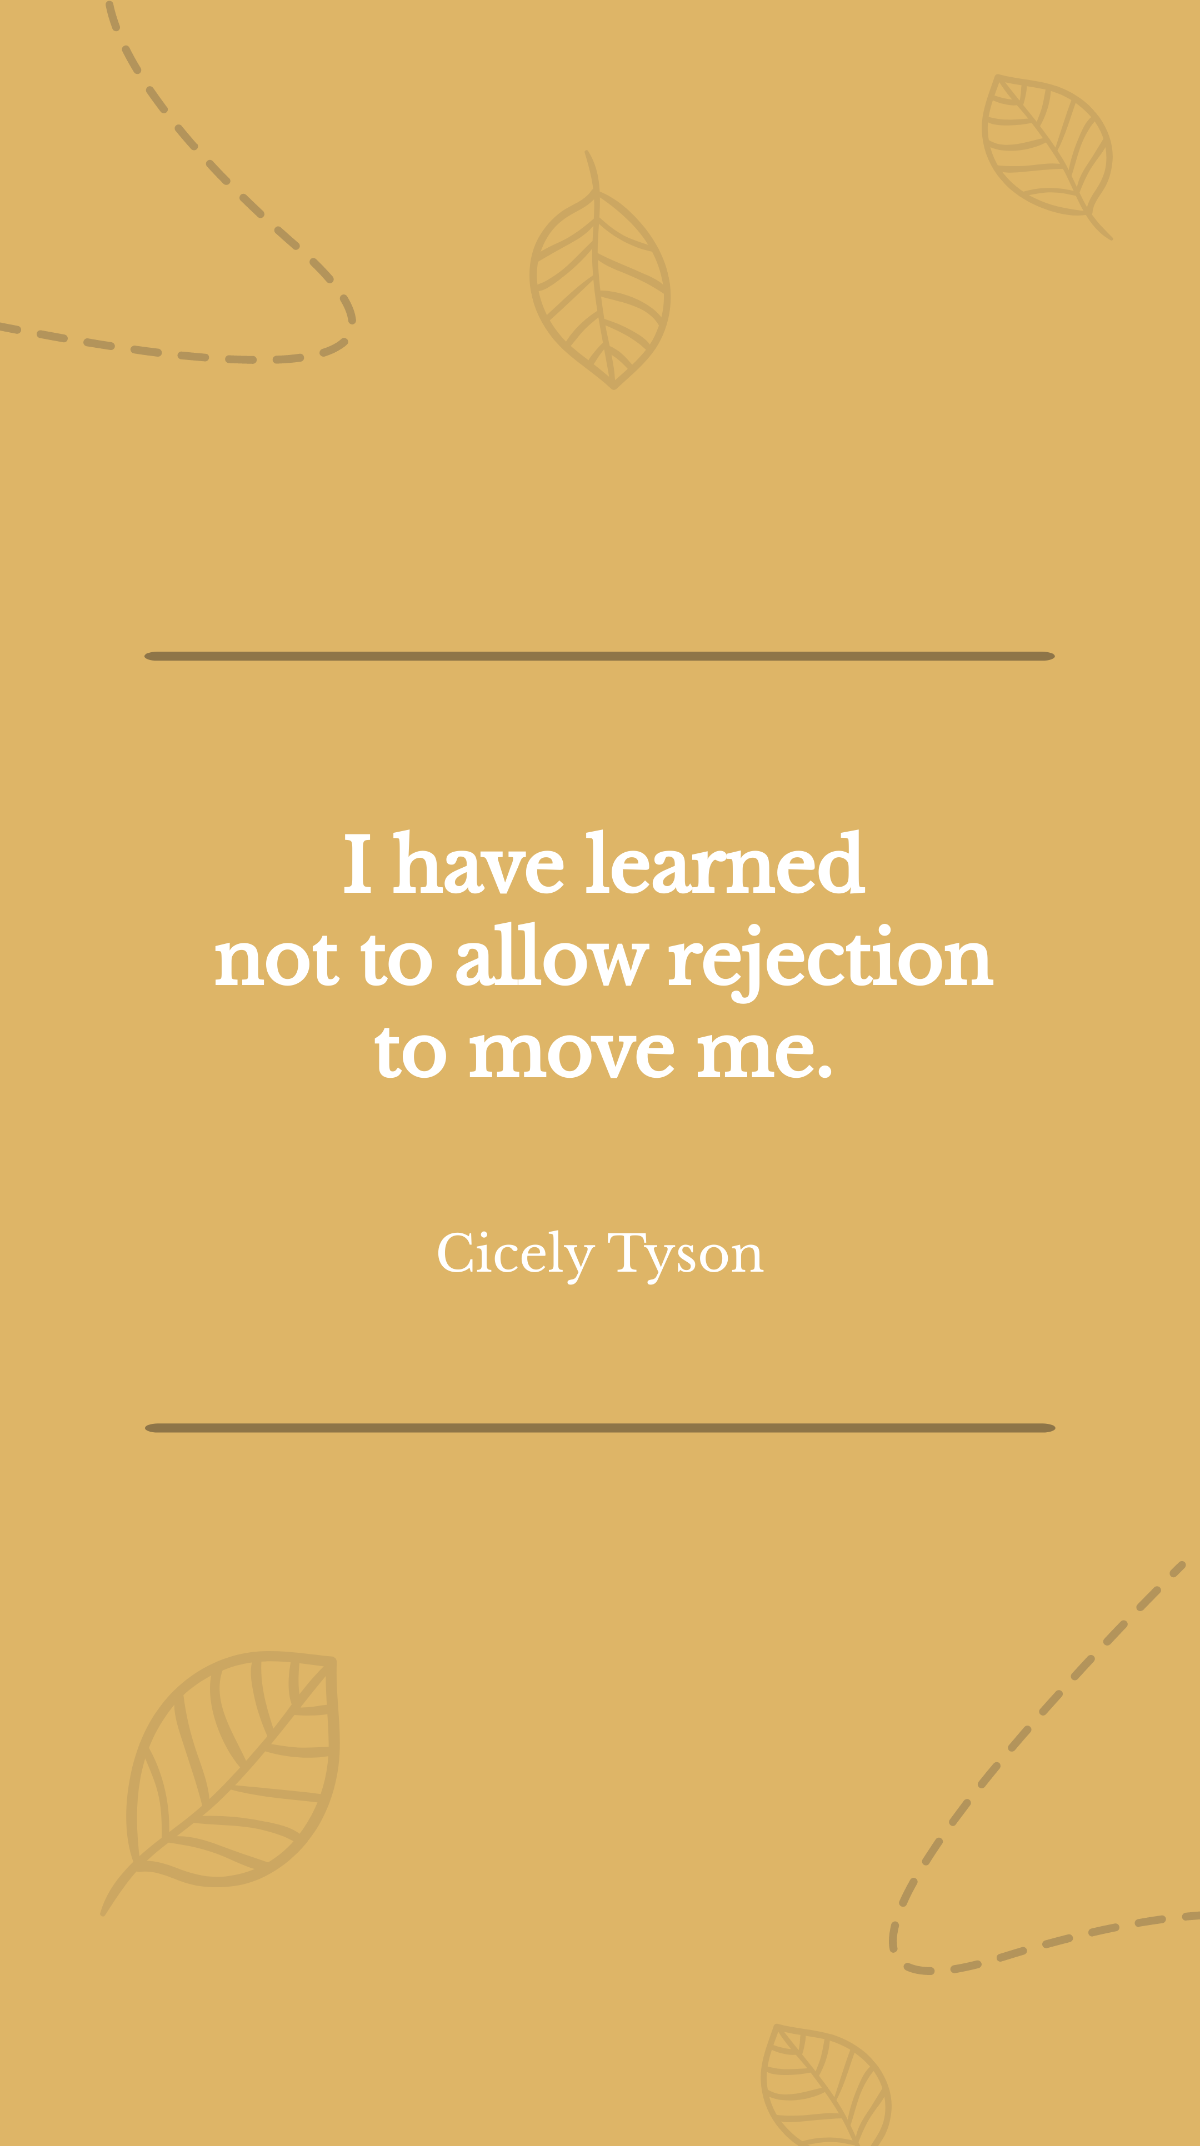 Cicely Tyson - I have learned not to allow rejection to move me Template